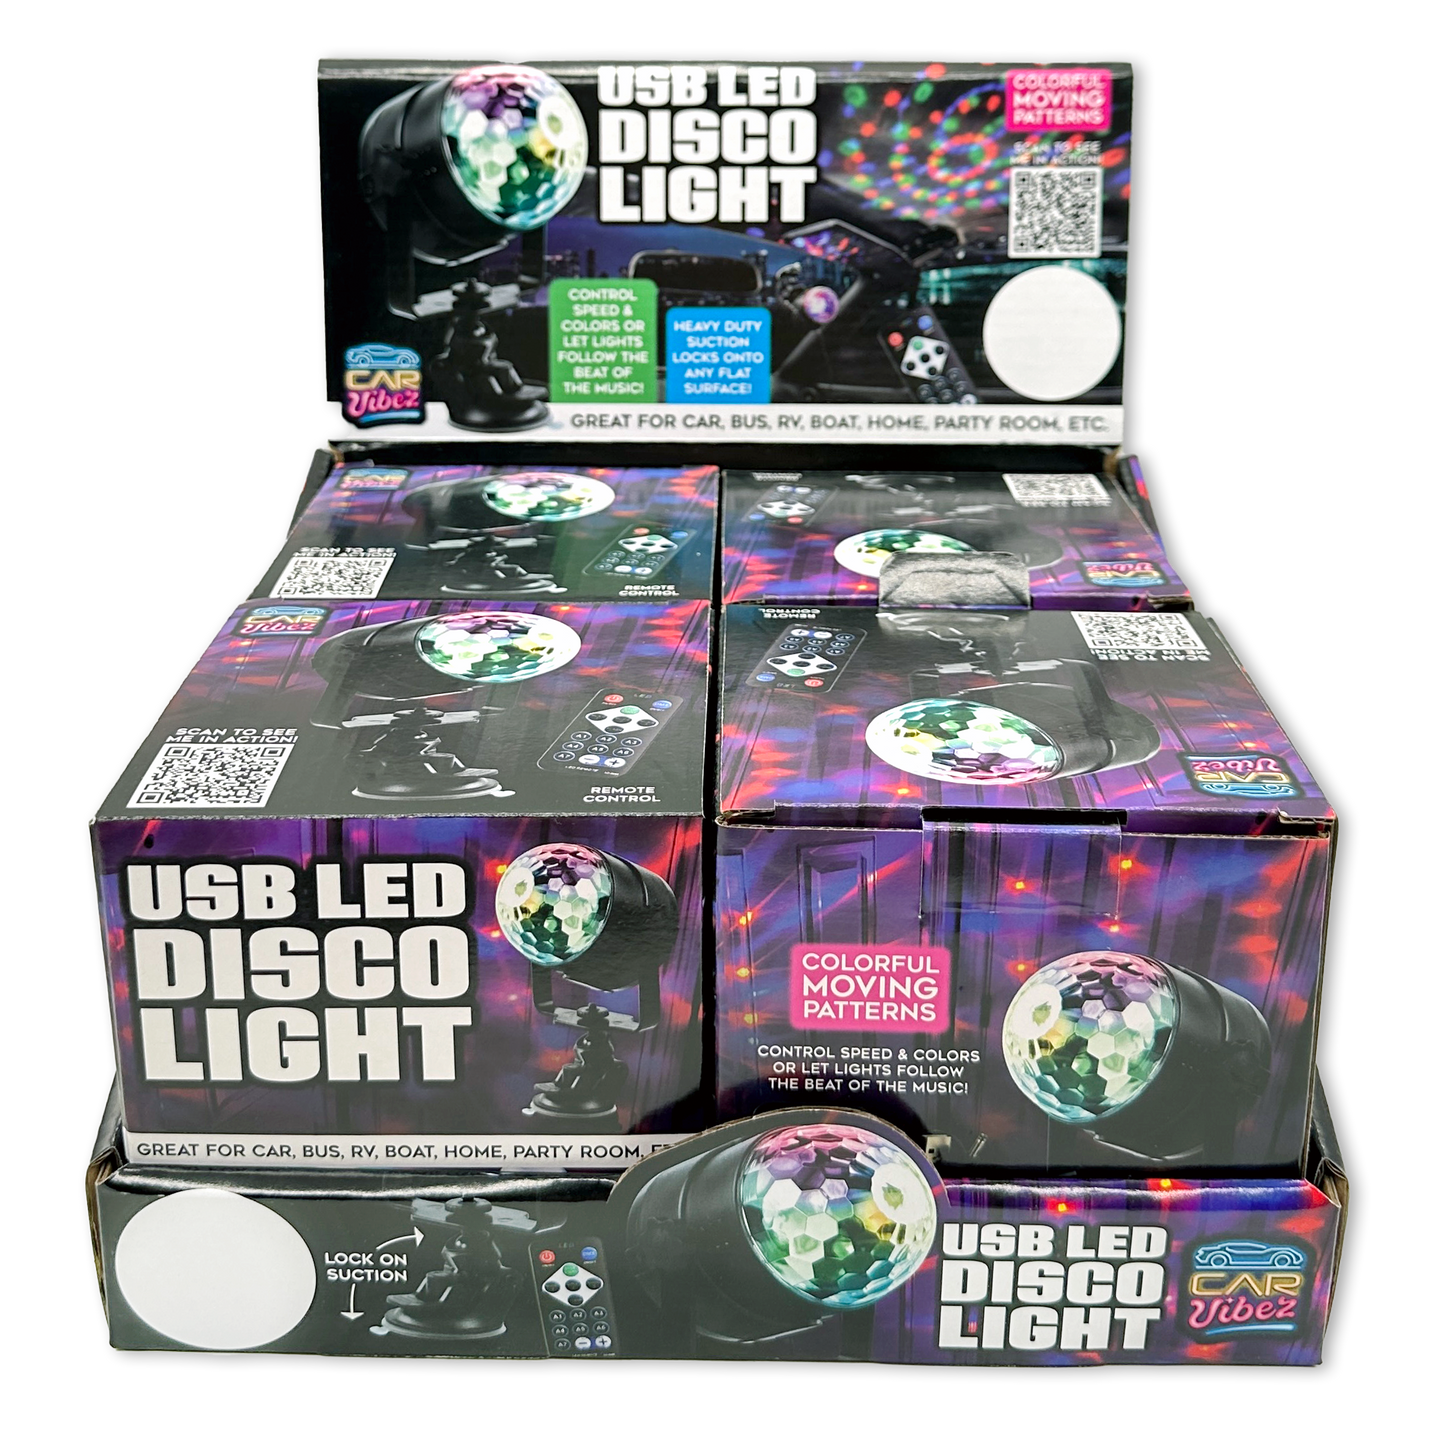 ITEM NUMBER 023575 USB SUCTION DISCO BALL 4 PIECES PER DISPLAY